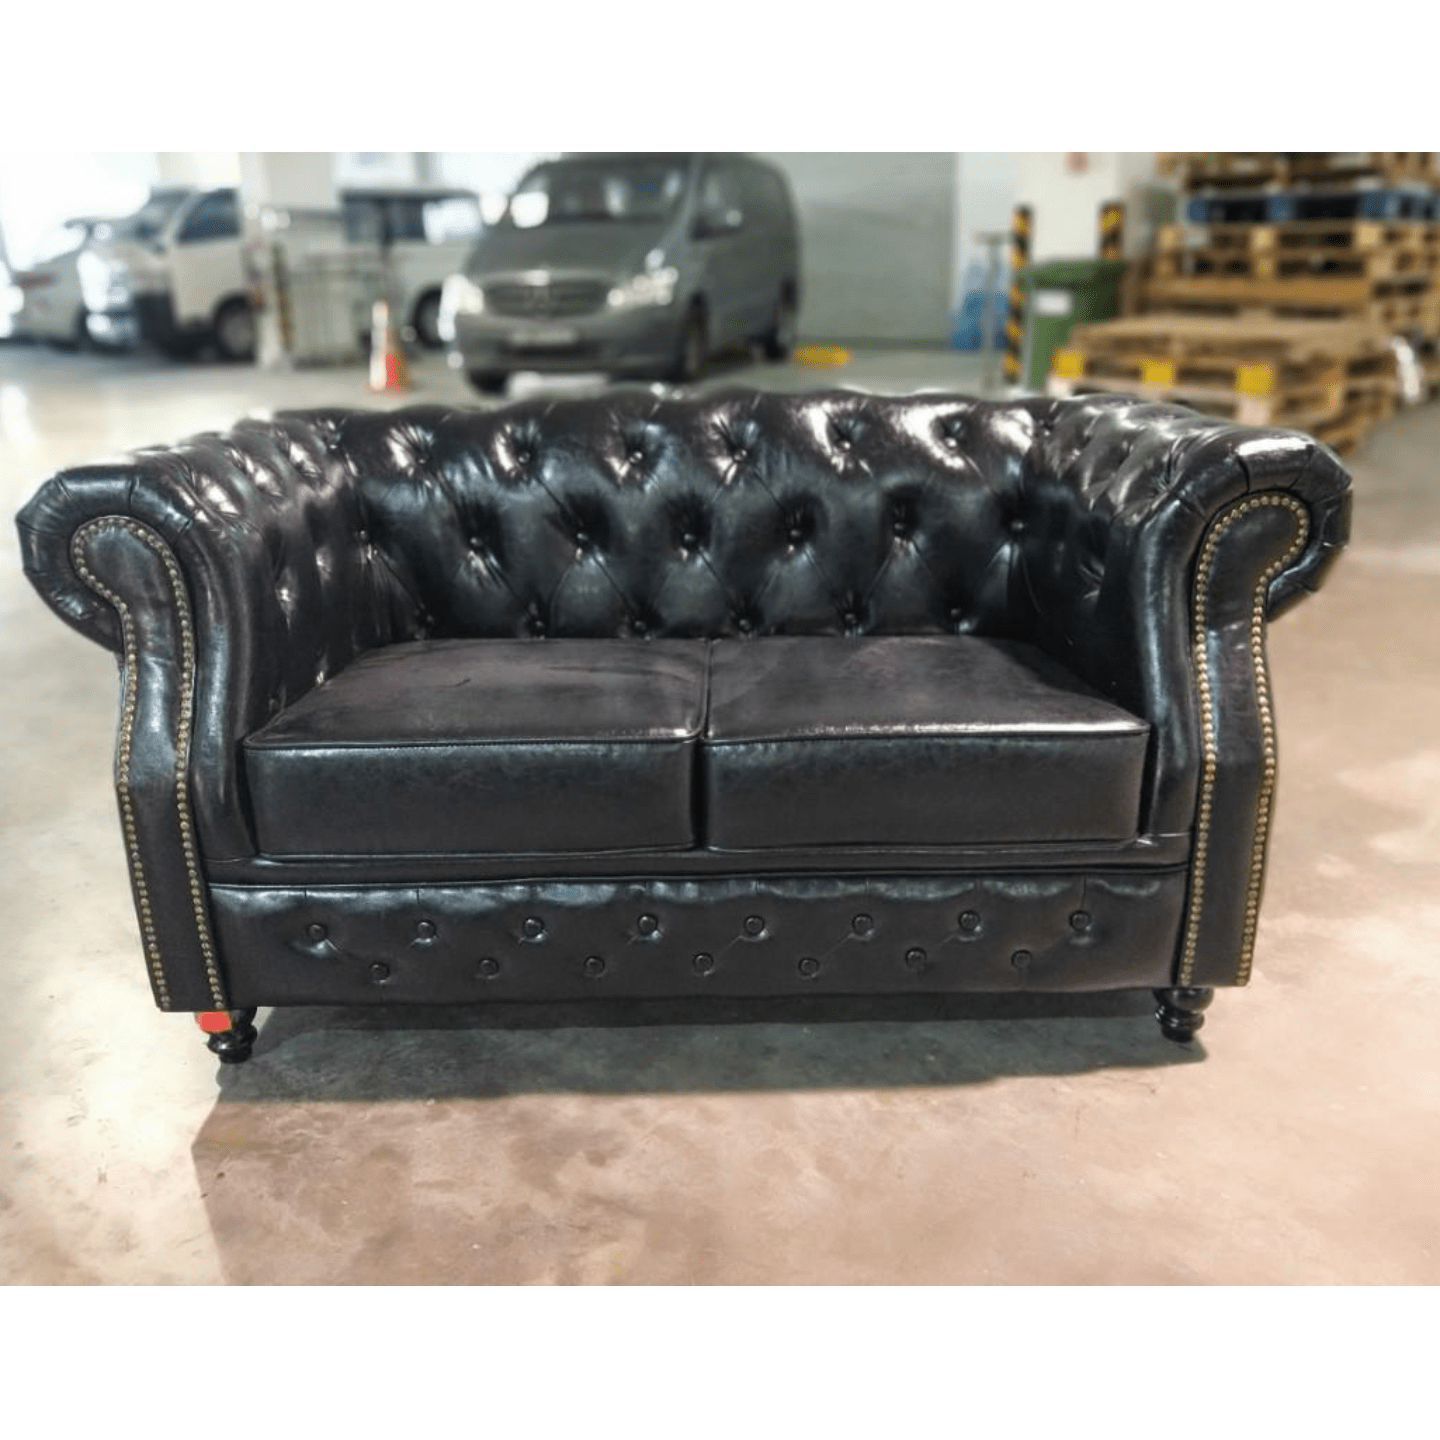 PRE ORDER BOTTEVA 2 Seater Chesterfield Sofa in GLOSS BLACK PU - Estimated Delivery by JULY 2023